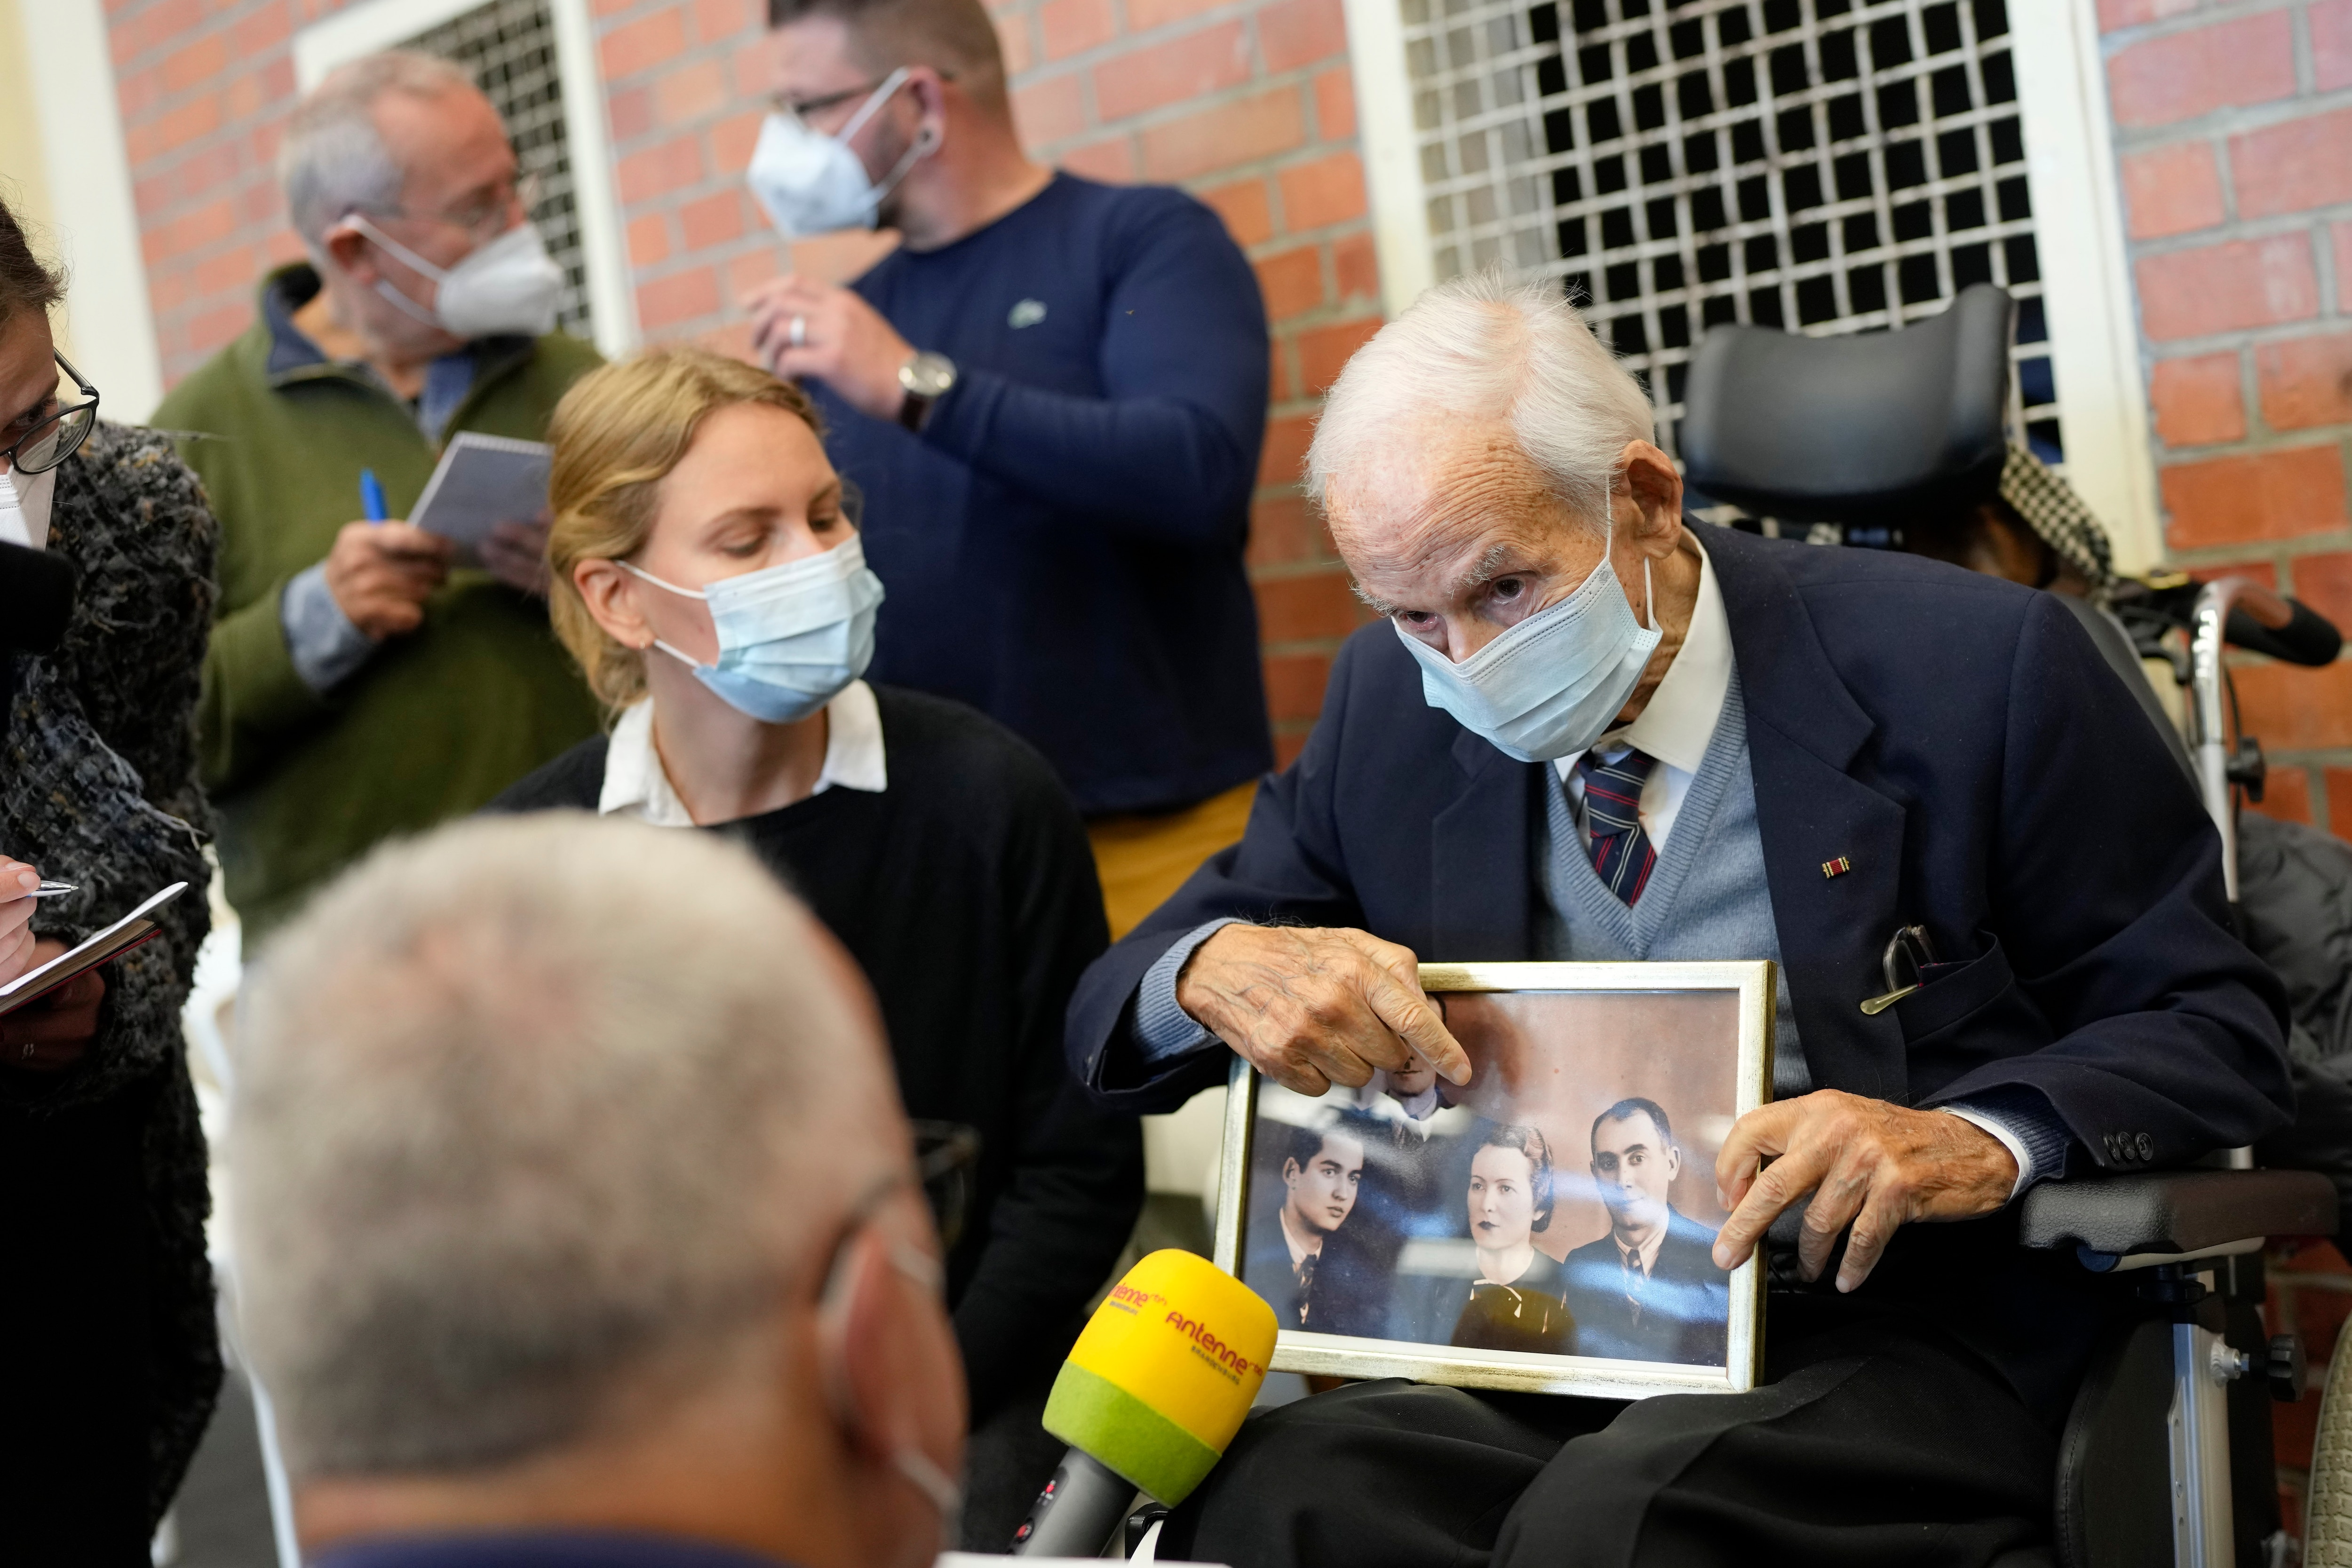 Leon Schwarzbaum, a 100-year-old Holocaust survivor, shows a family photo as he speaks to media ahead of the trial of a former concentration camp guard.